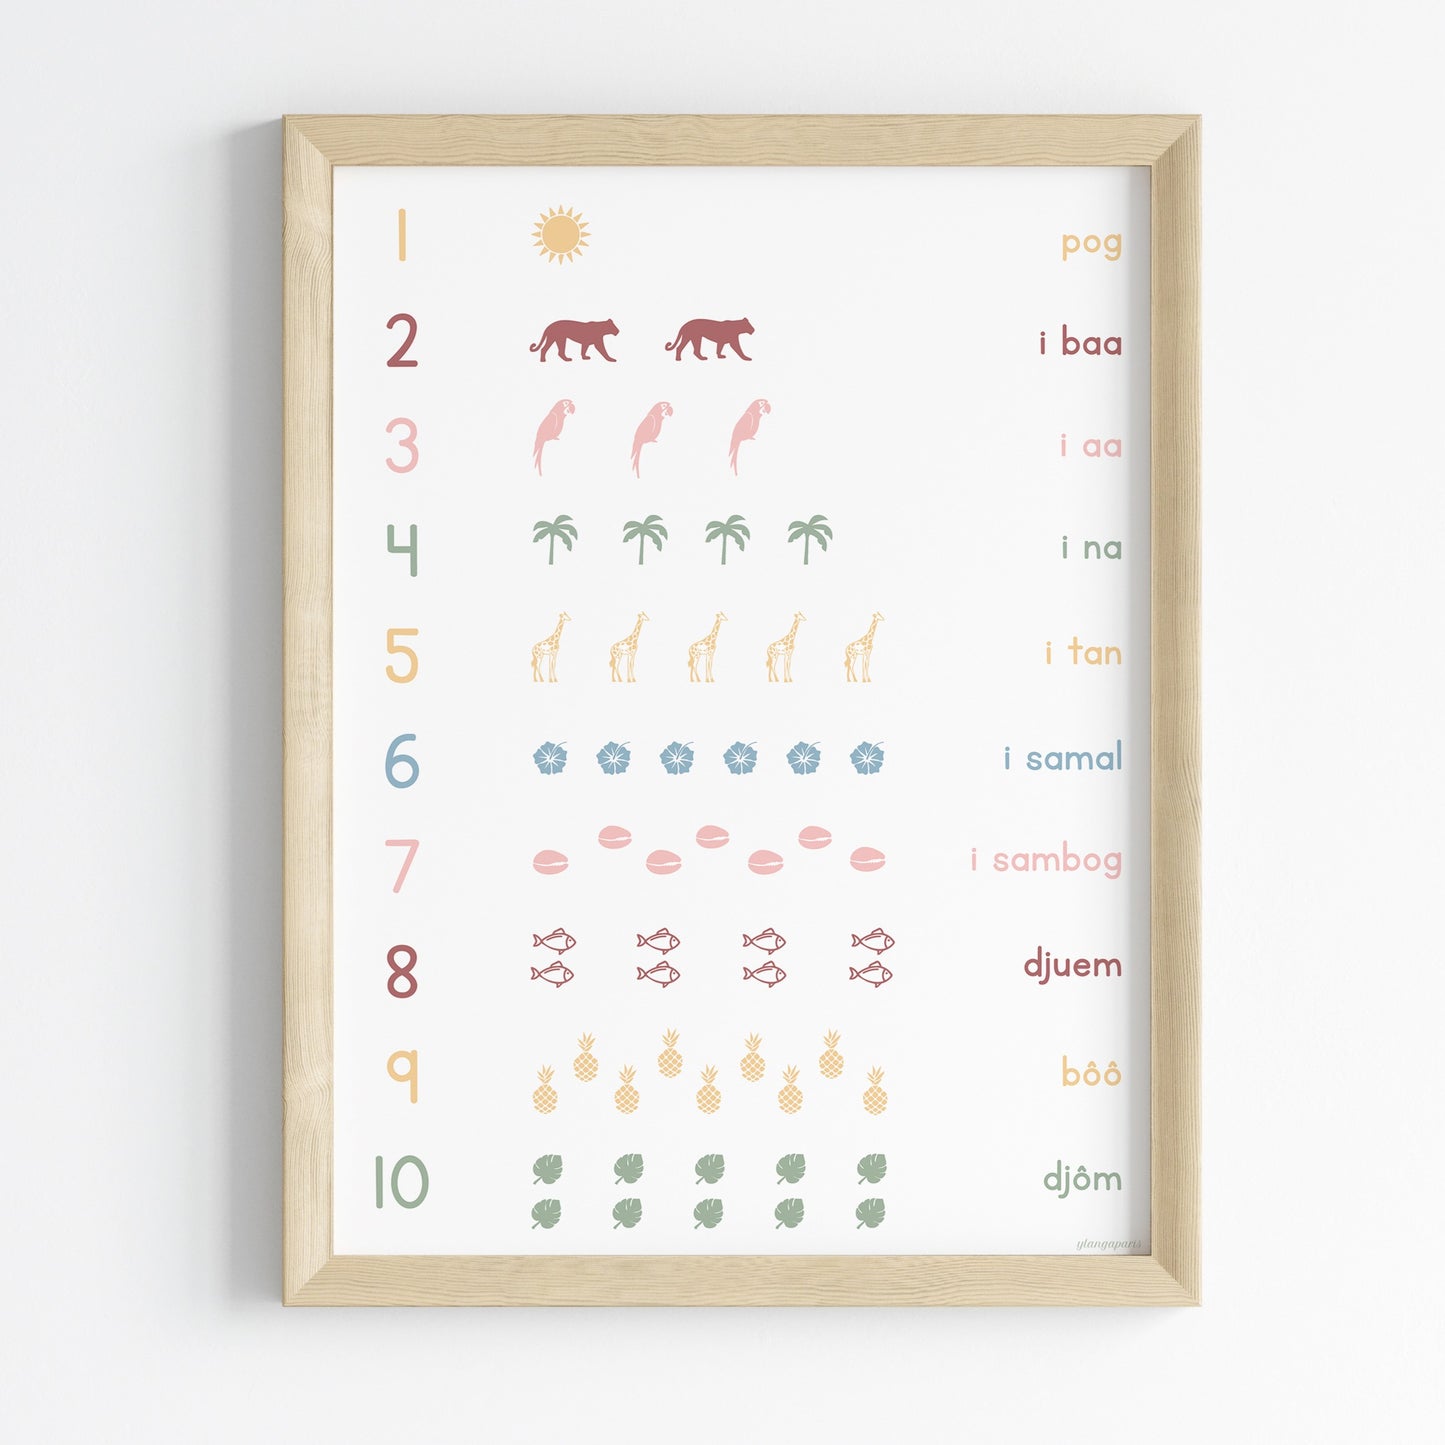 Counting in Bassa - Poster 30x40 cm - Children's Decoration Poster